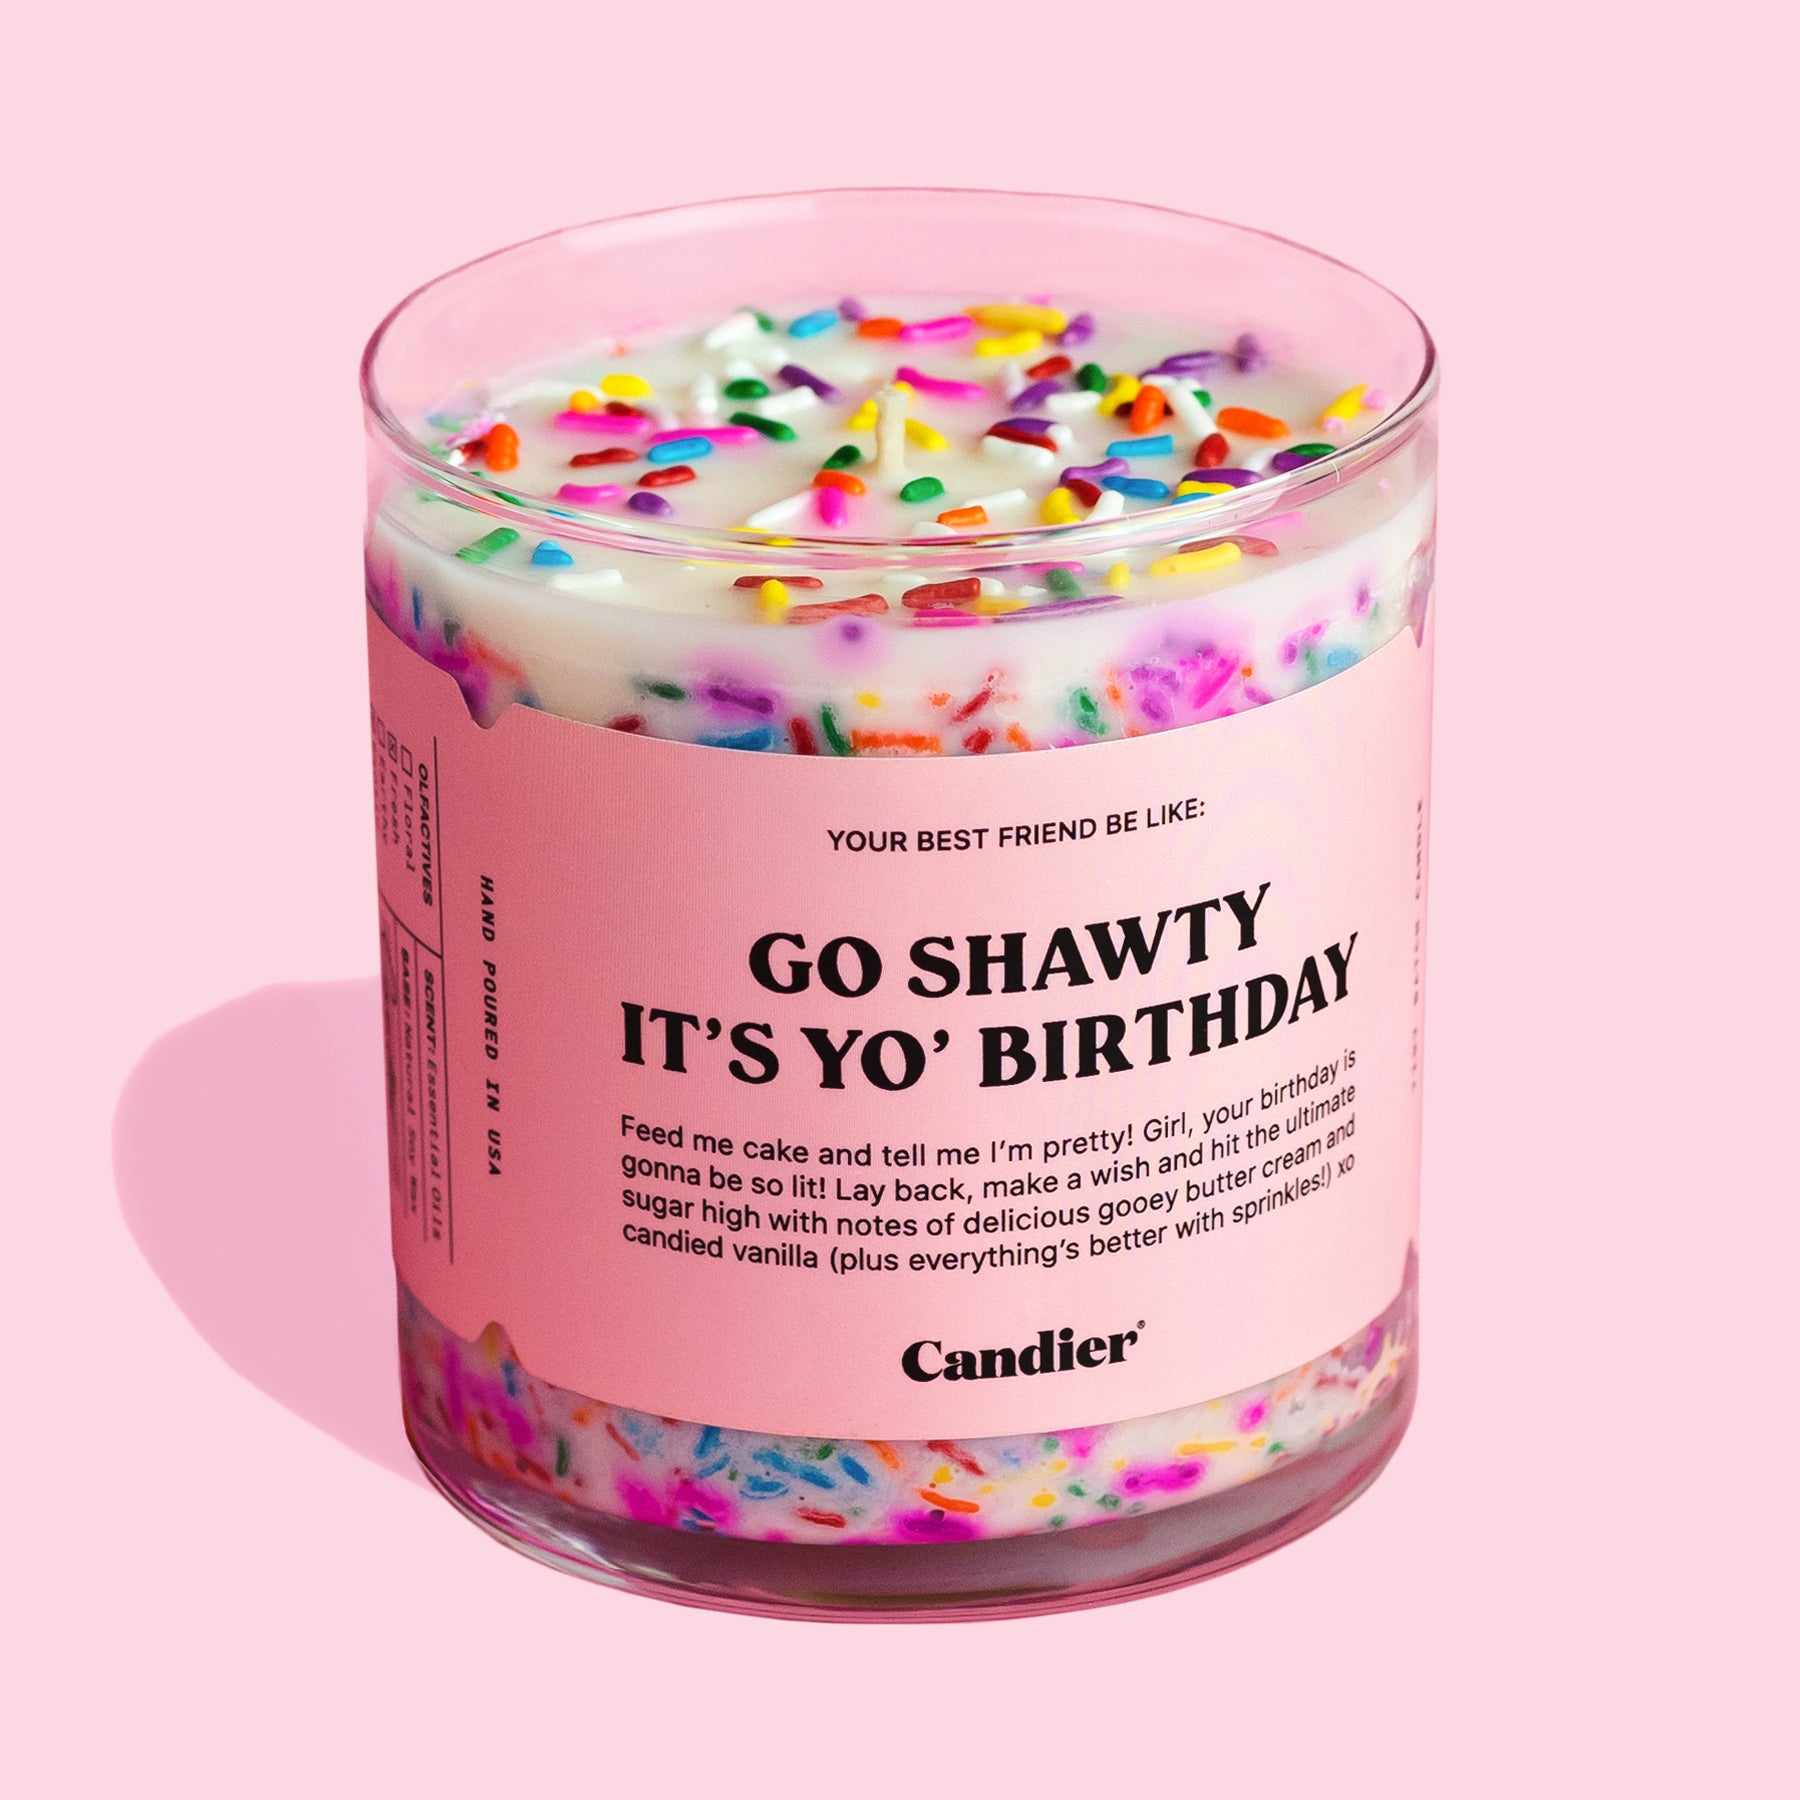 Cute birthday cake scented candle with colorful sprinkles